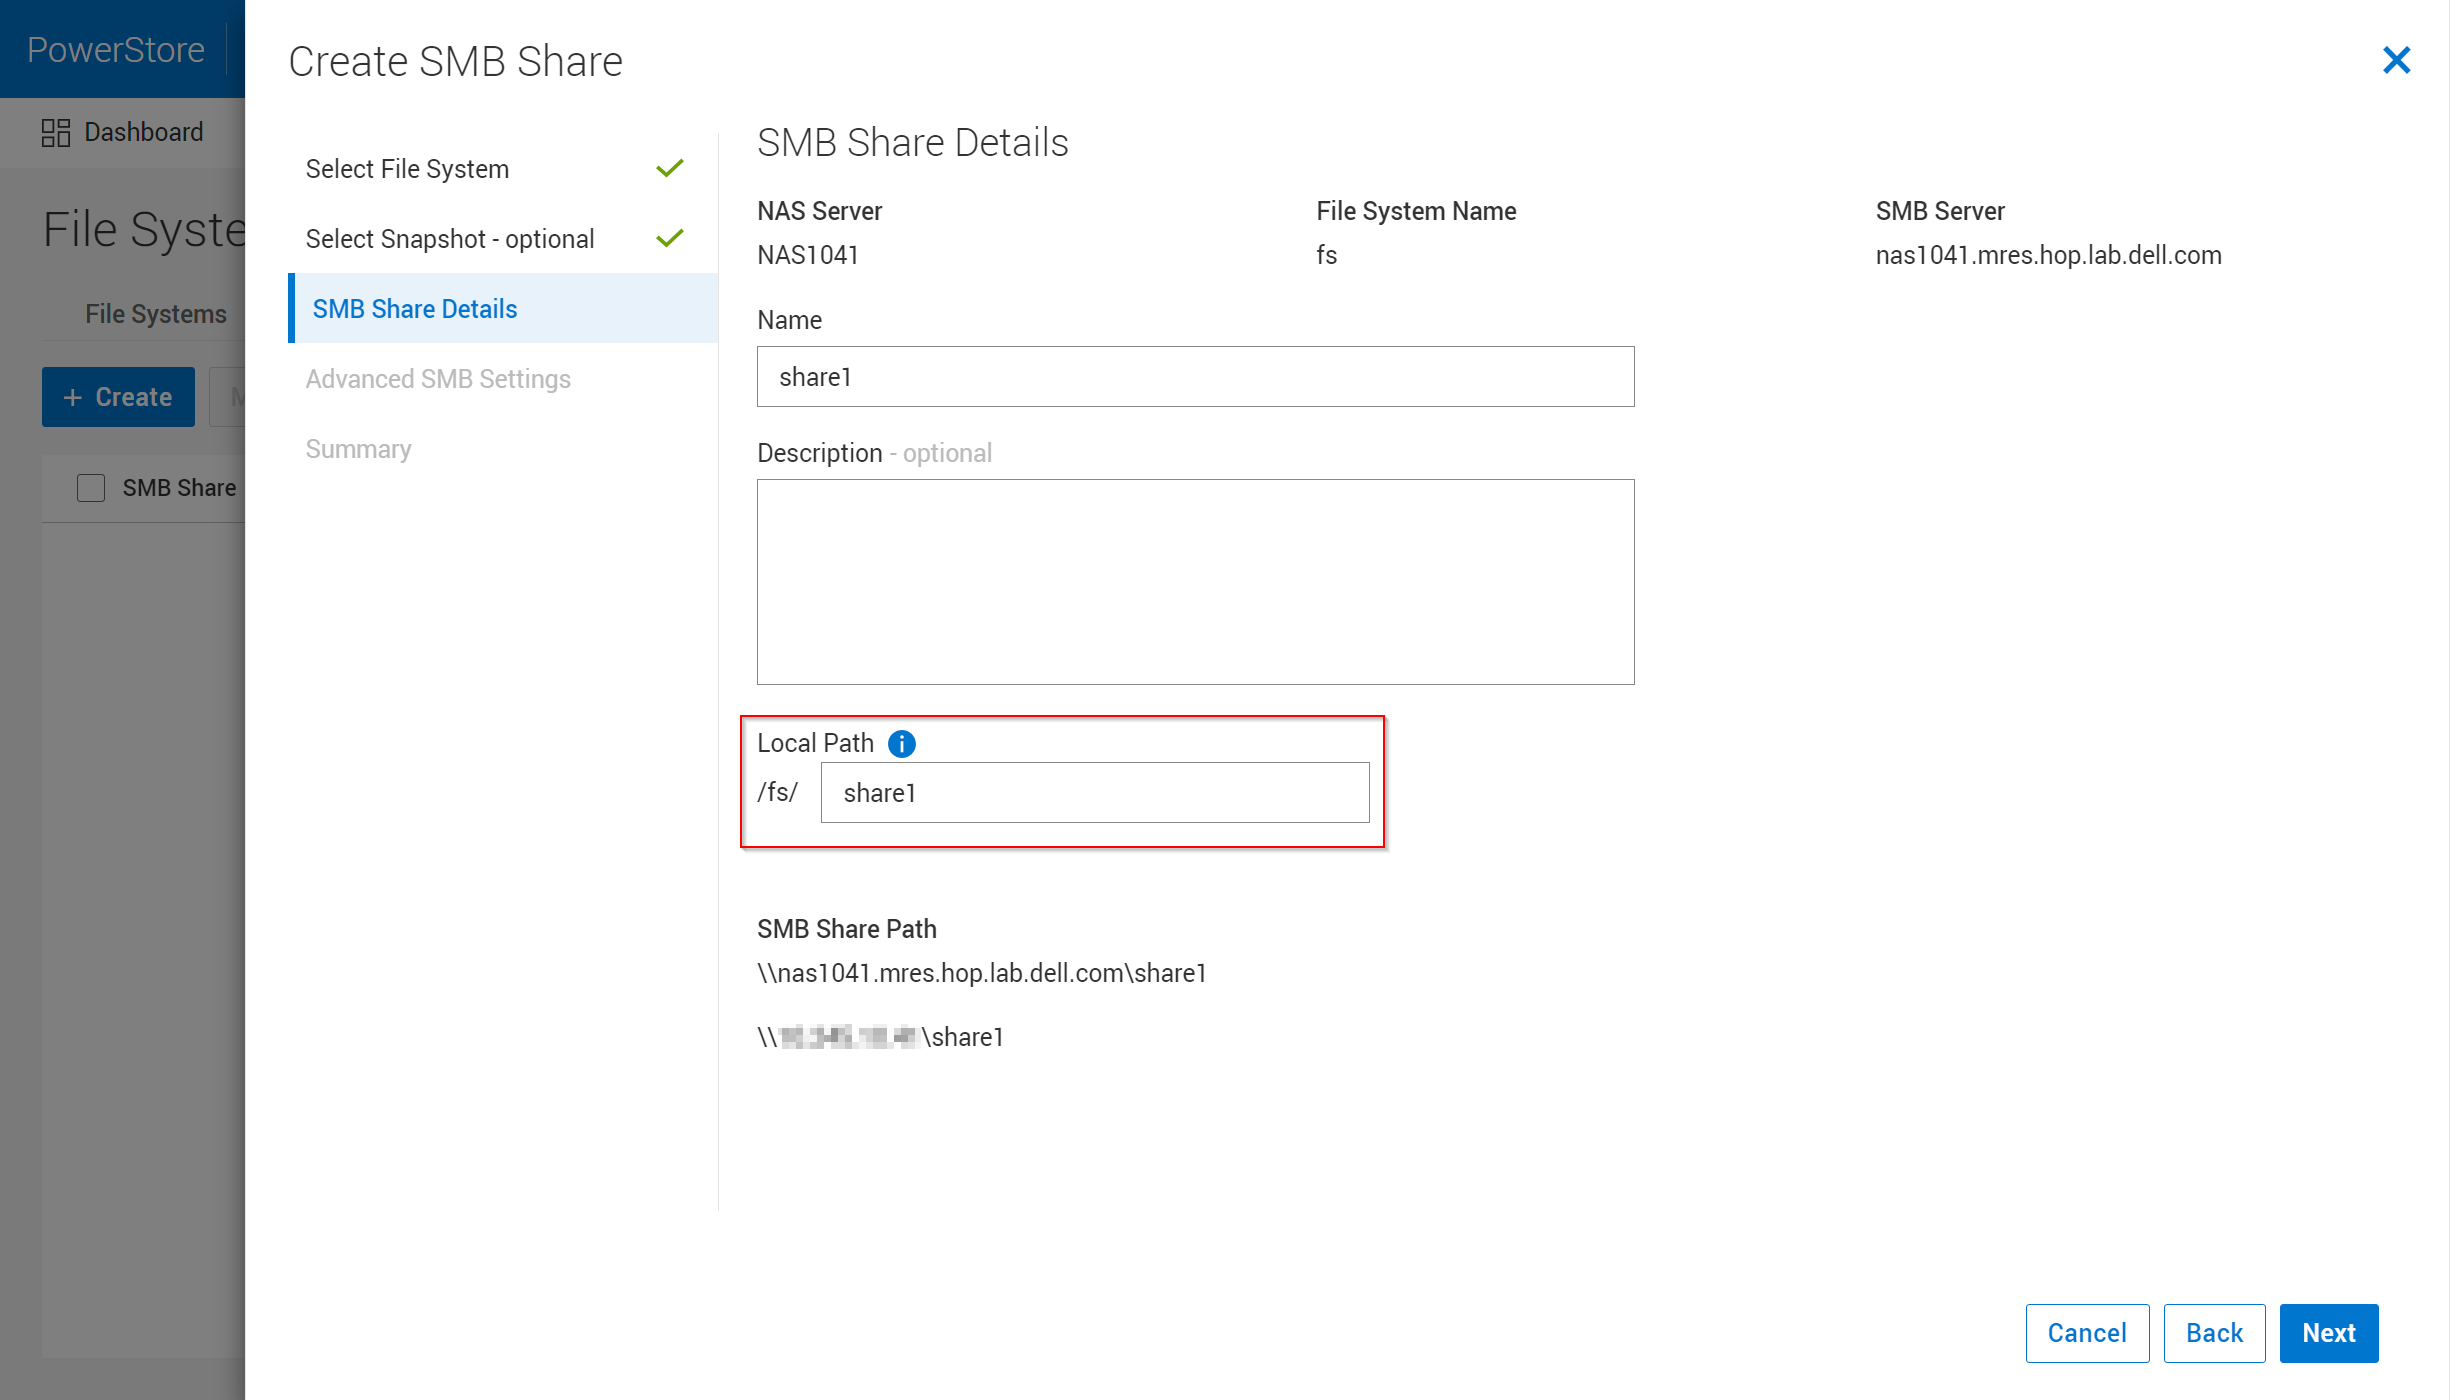 A screenshot showing the creation of the new SMB share on the subdirectory in PowerStore Manager.